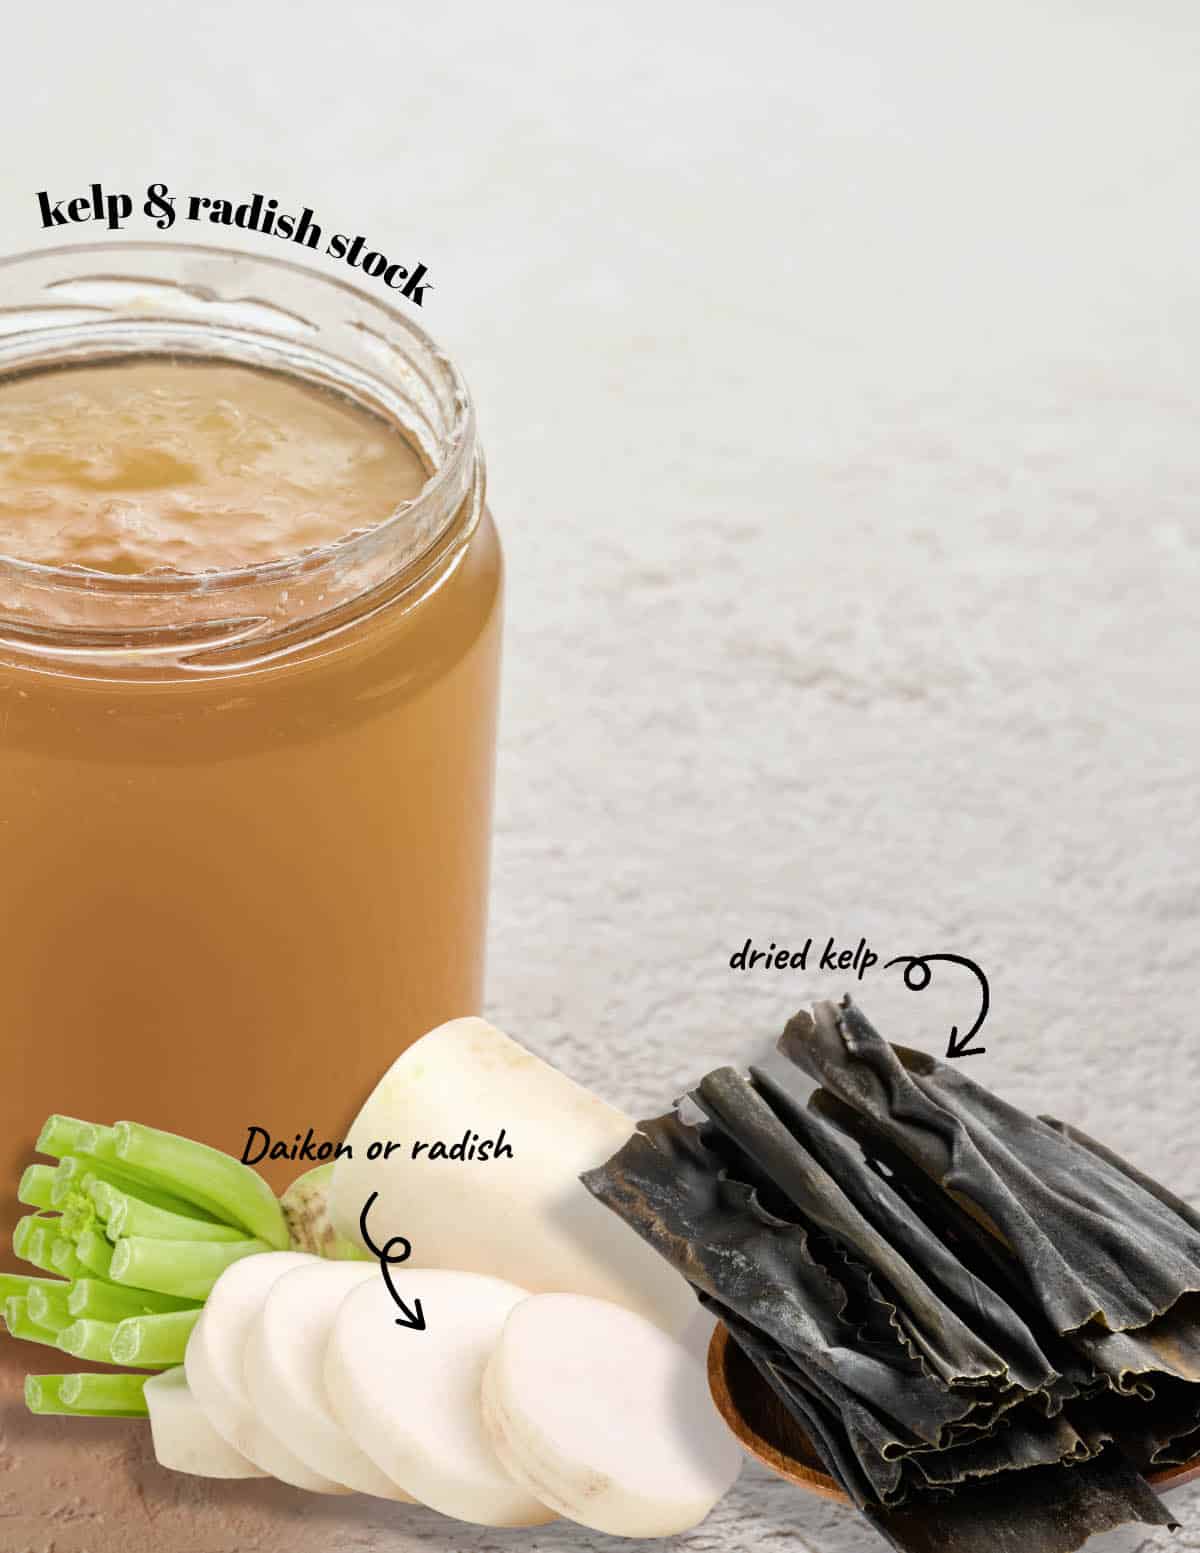 Homemade kelp and radish stock for an umami-rich, flavorful base for marinades and soups